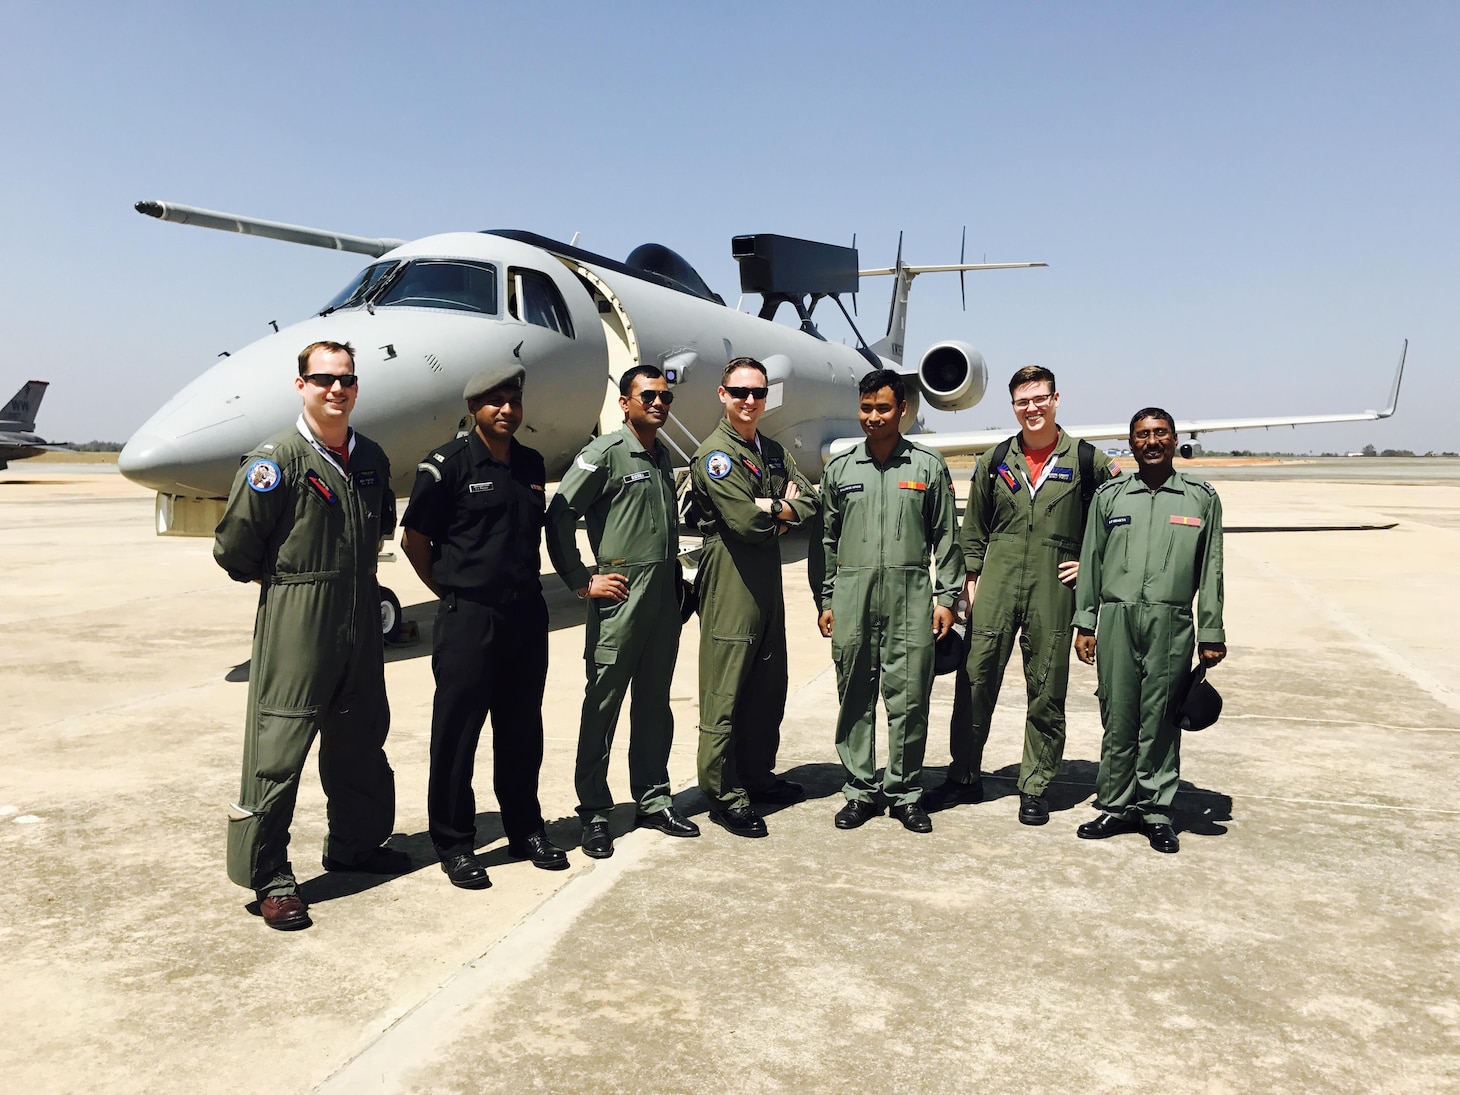 (February 15, 2017) Patrol Squadron Ten (VP-10) Red Lancers pose with members of the Indian Air Force in front of a Defense Research and Development Organization (DRDO) Airborne Early Warning and Control System (AEWACS) at Aero India 2017. 